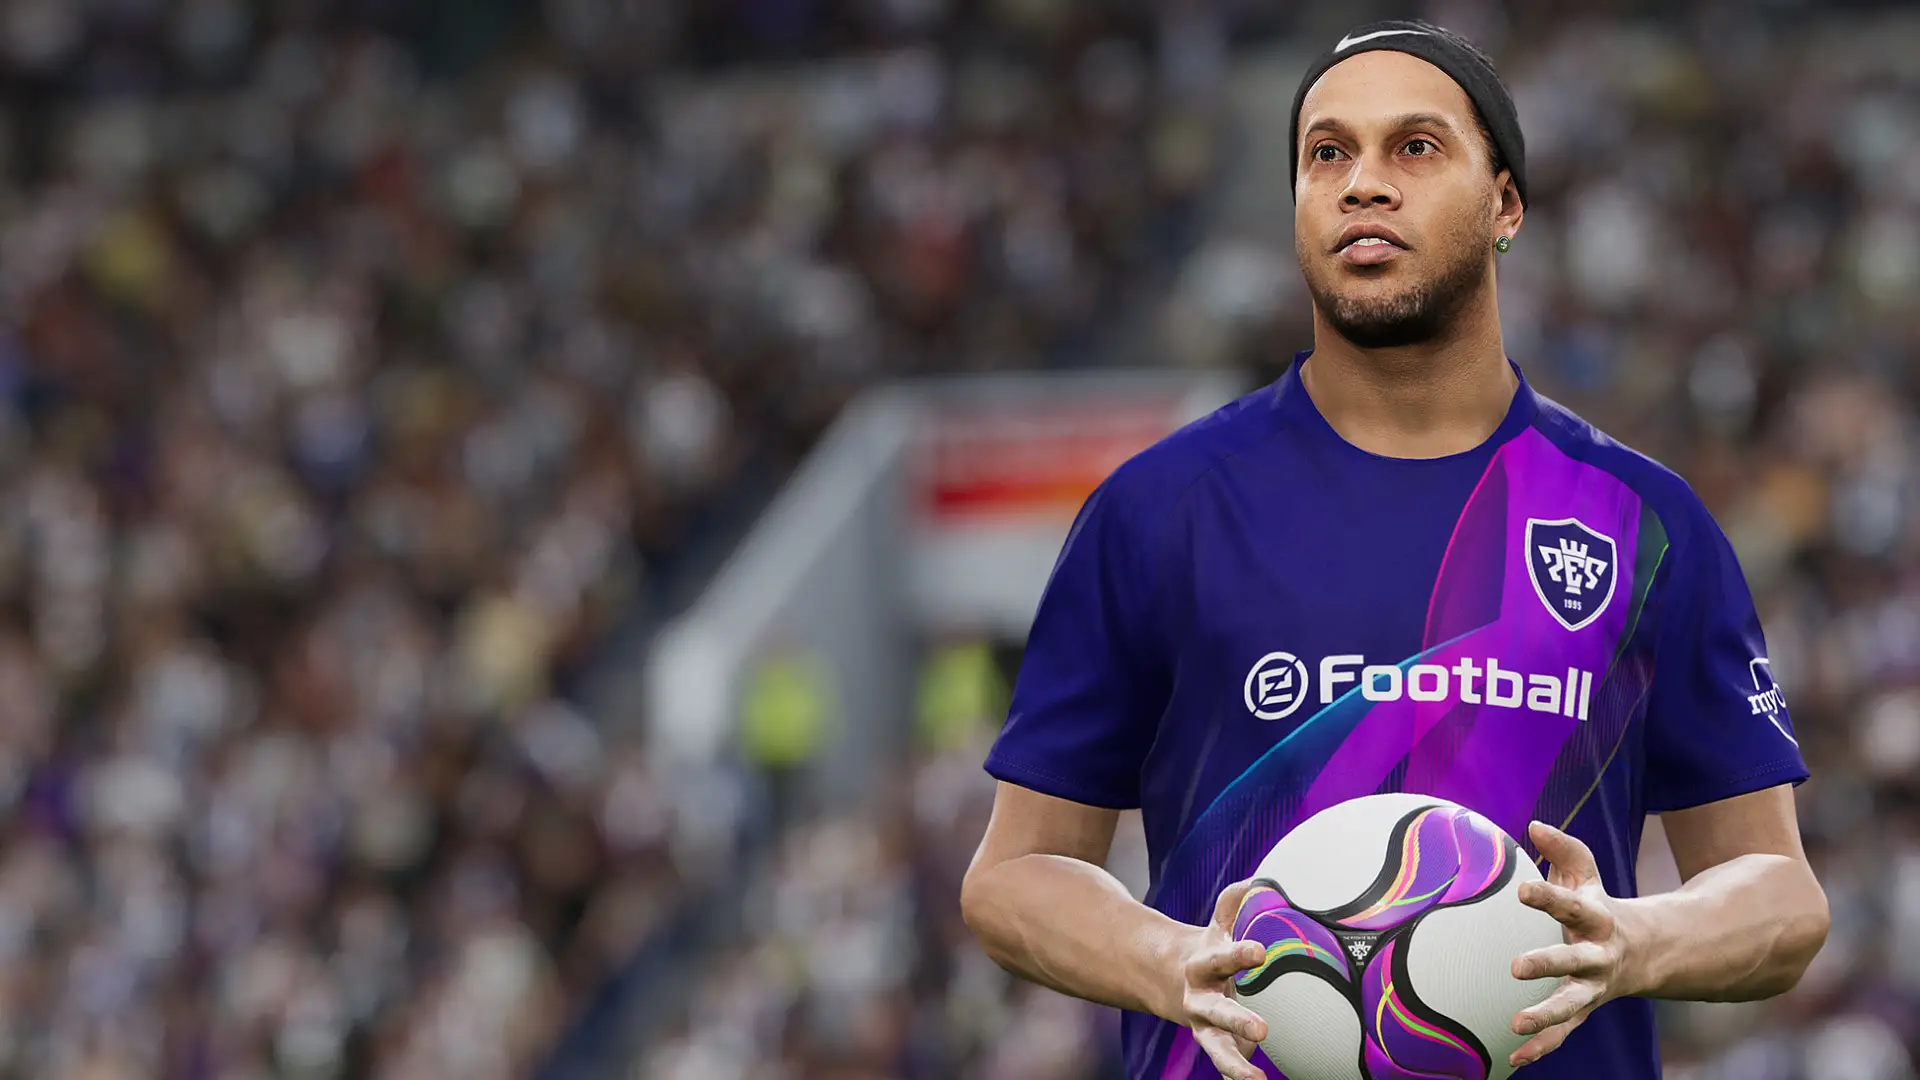 Best Pes 21 Formations The Best Managers In Pes 21 Revealed